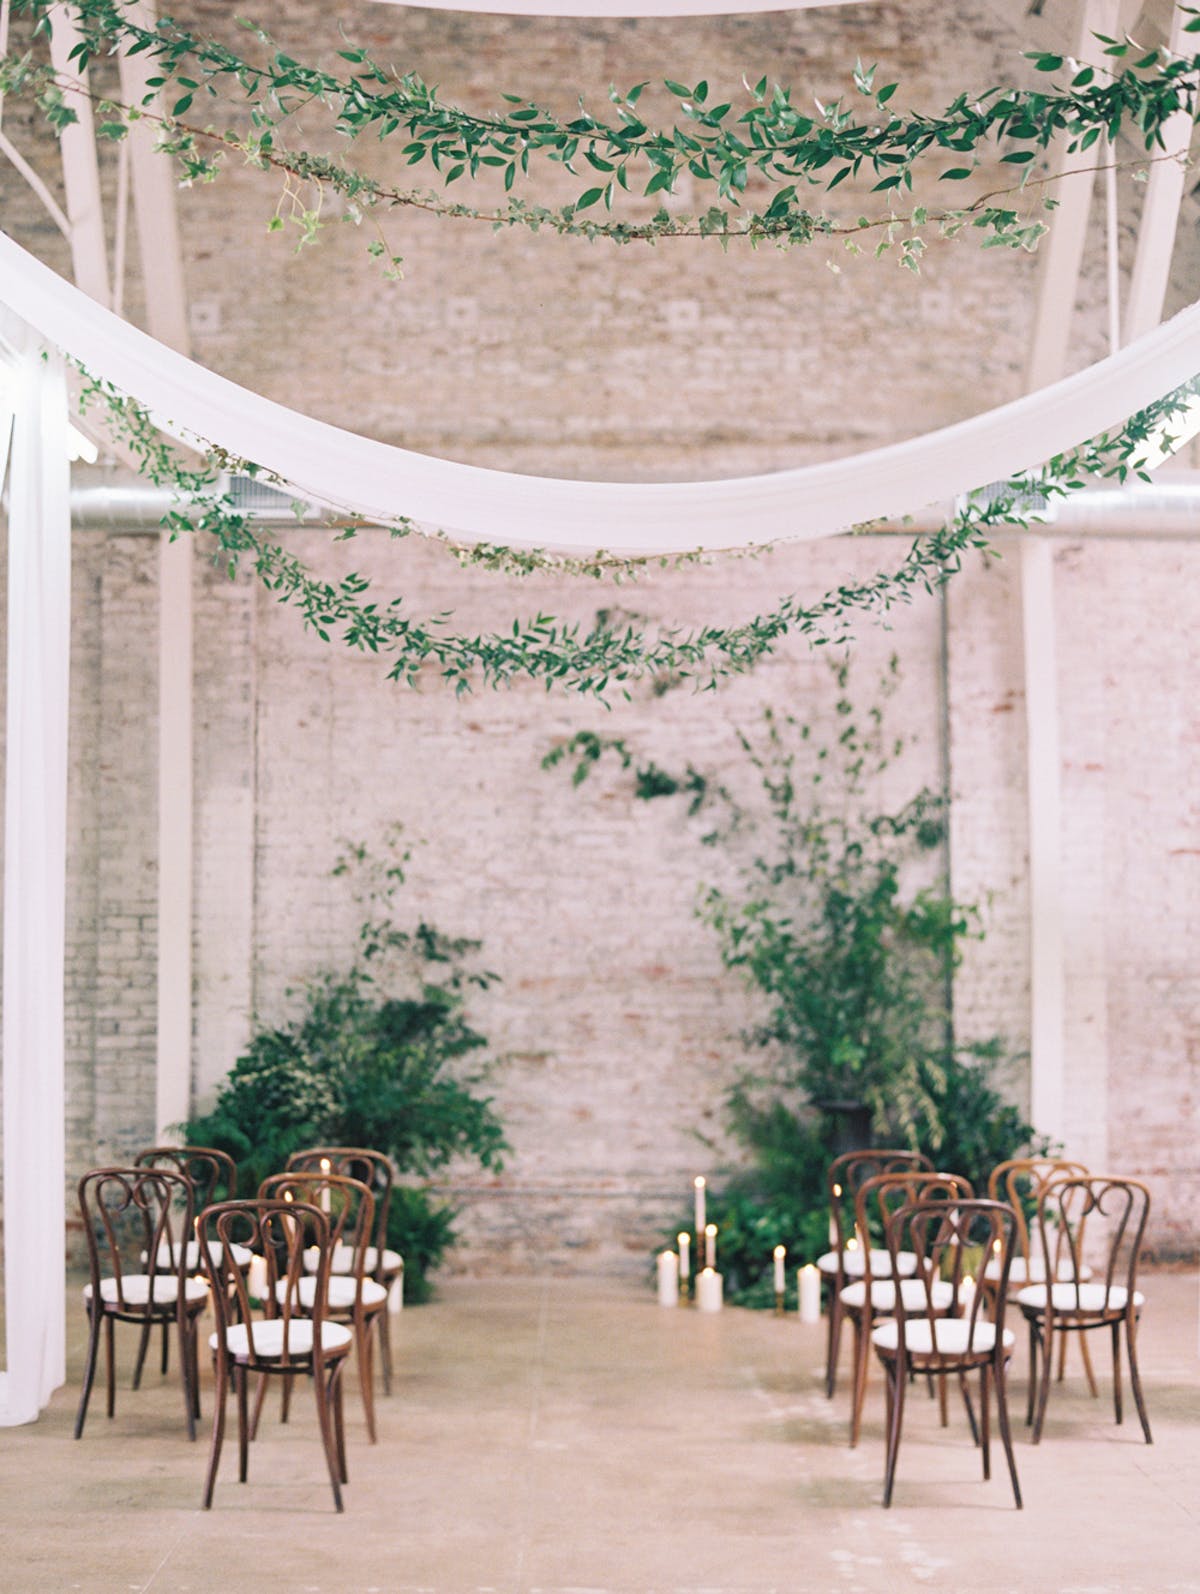 Stunning minimalist indoor wedding ceremony decor with greeneries and white draping. // ❤ Check Out These Gorgeous 20 Indoor Wedding Ceremony Ideas. // http://mysweetengagement.com/indoor-wedding-ceremony-ideas